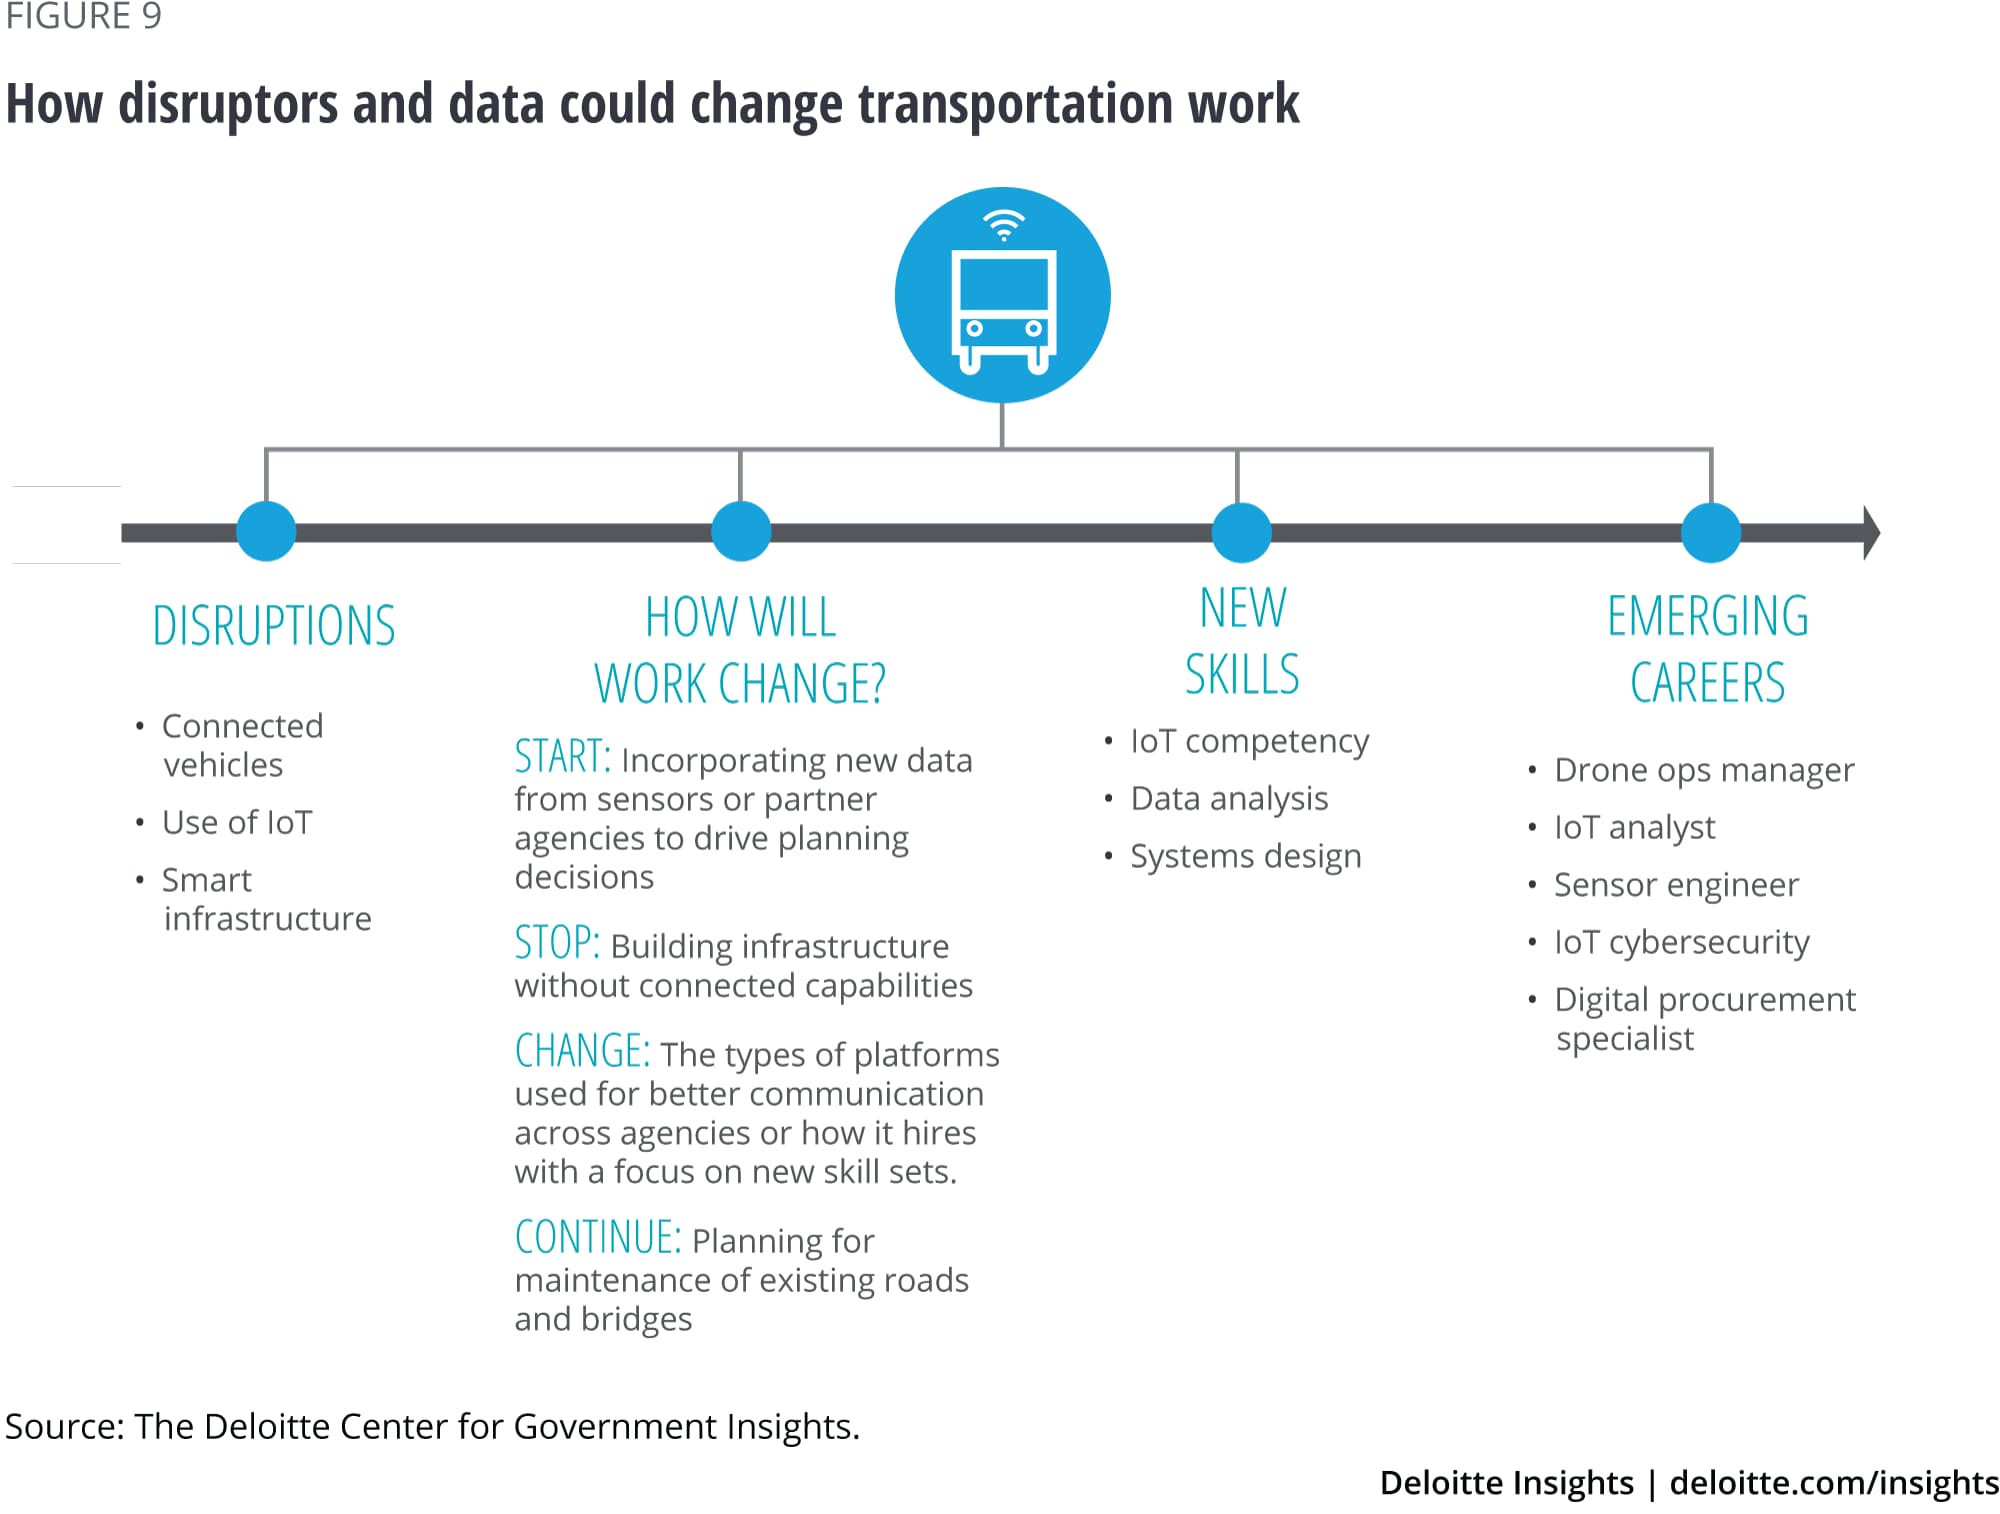 How disruptors and data could change transportation work